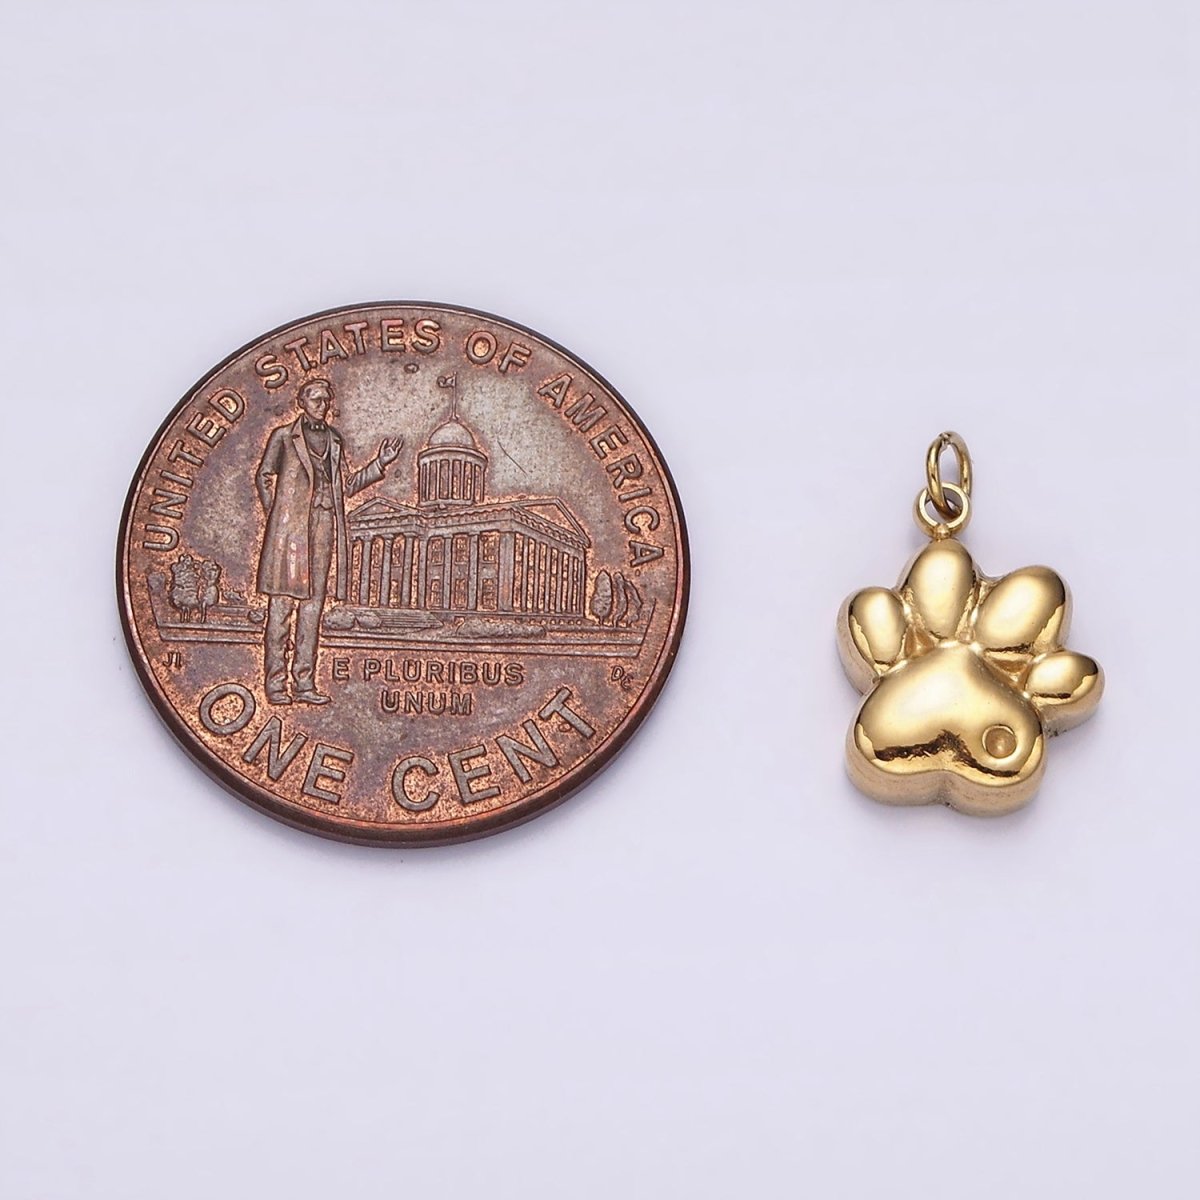 Stainless Steel Dot Pawprint Pet Animal Minimalist Charm in Gold & Silver | P1308 P1309 - DLUXCA